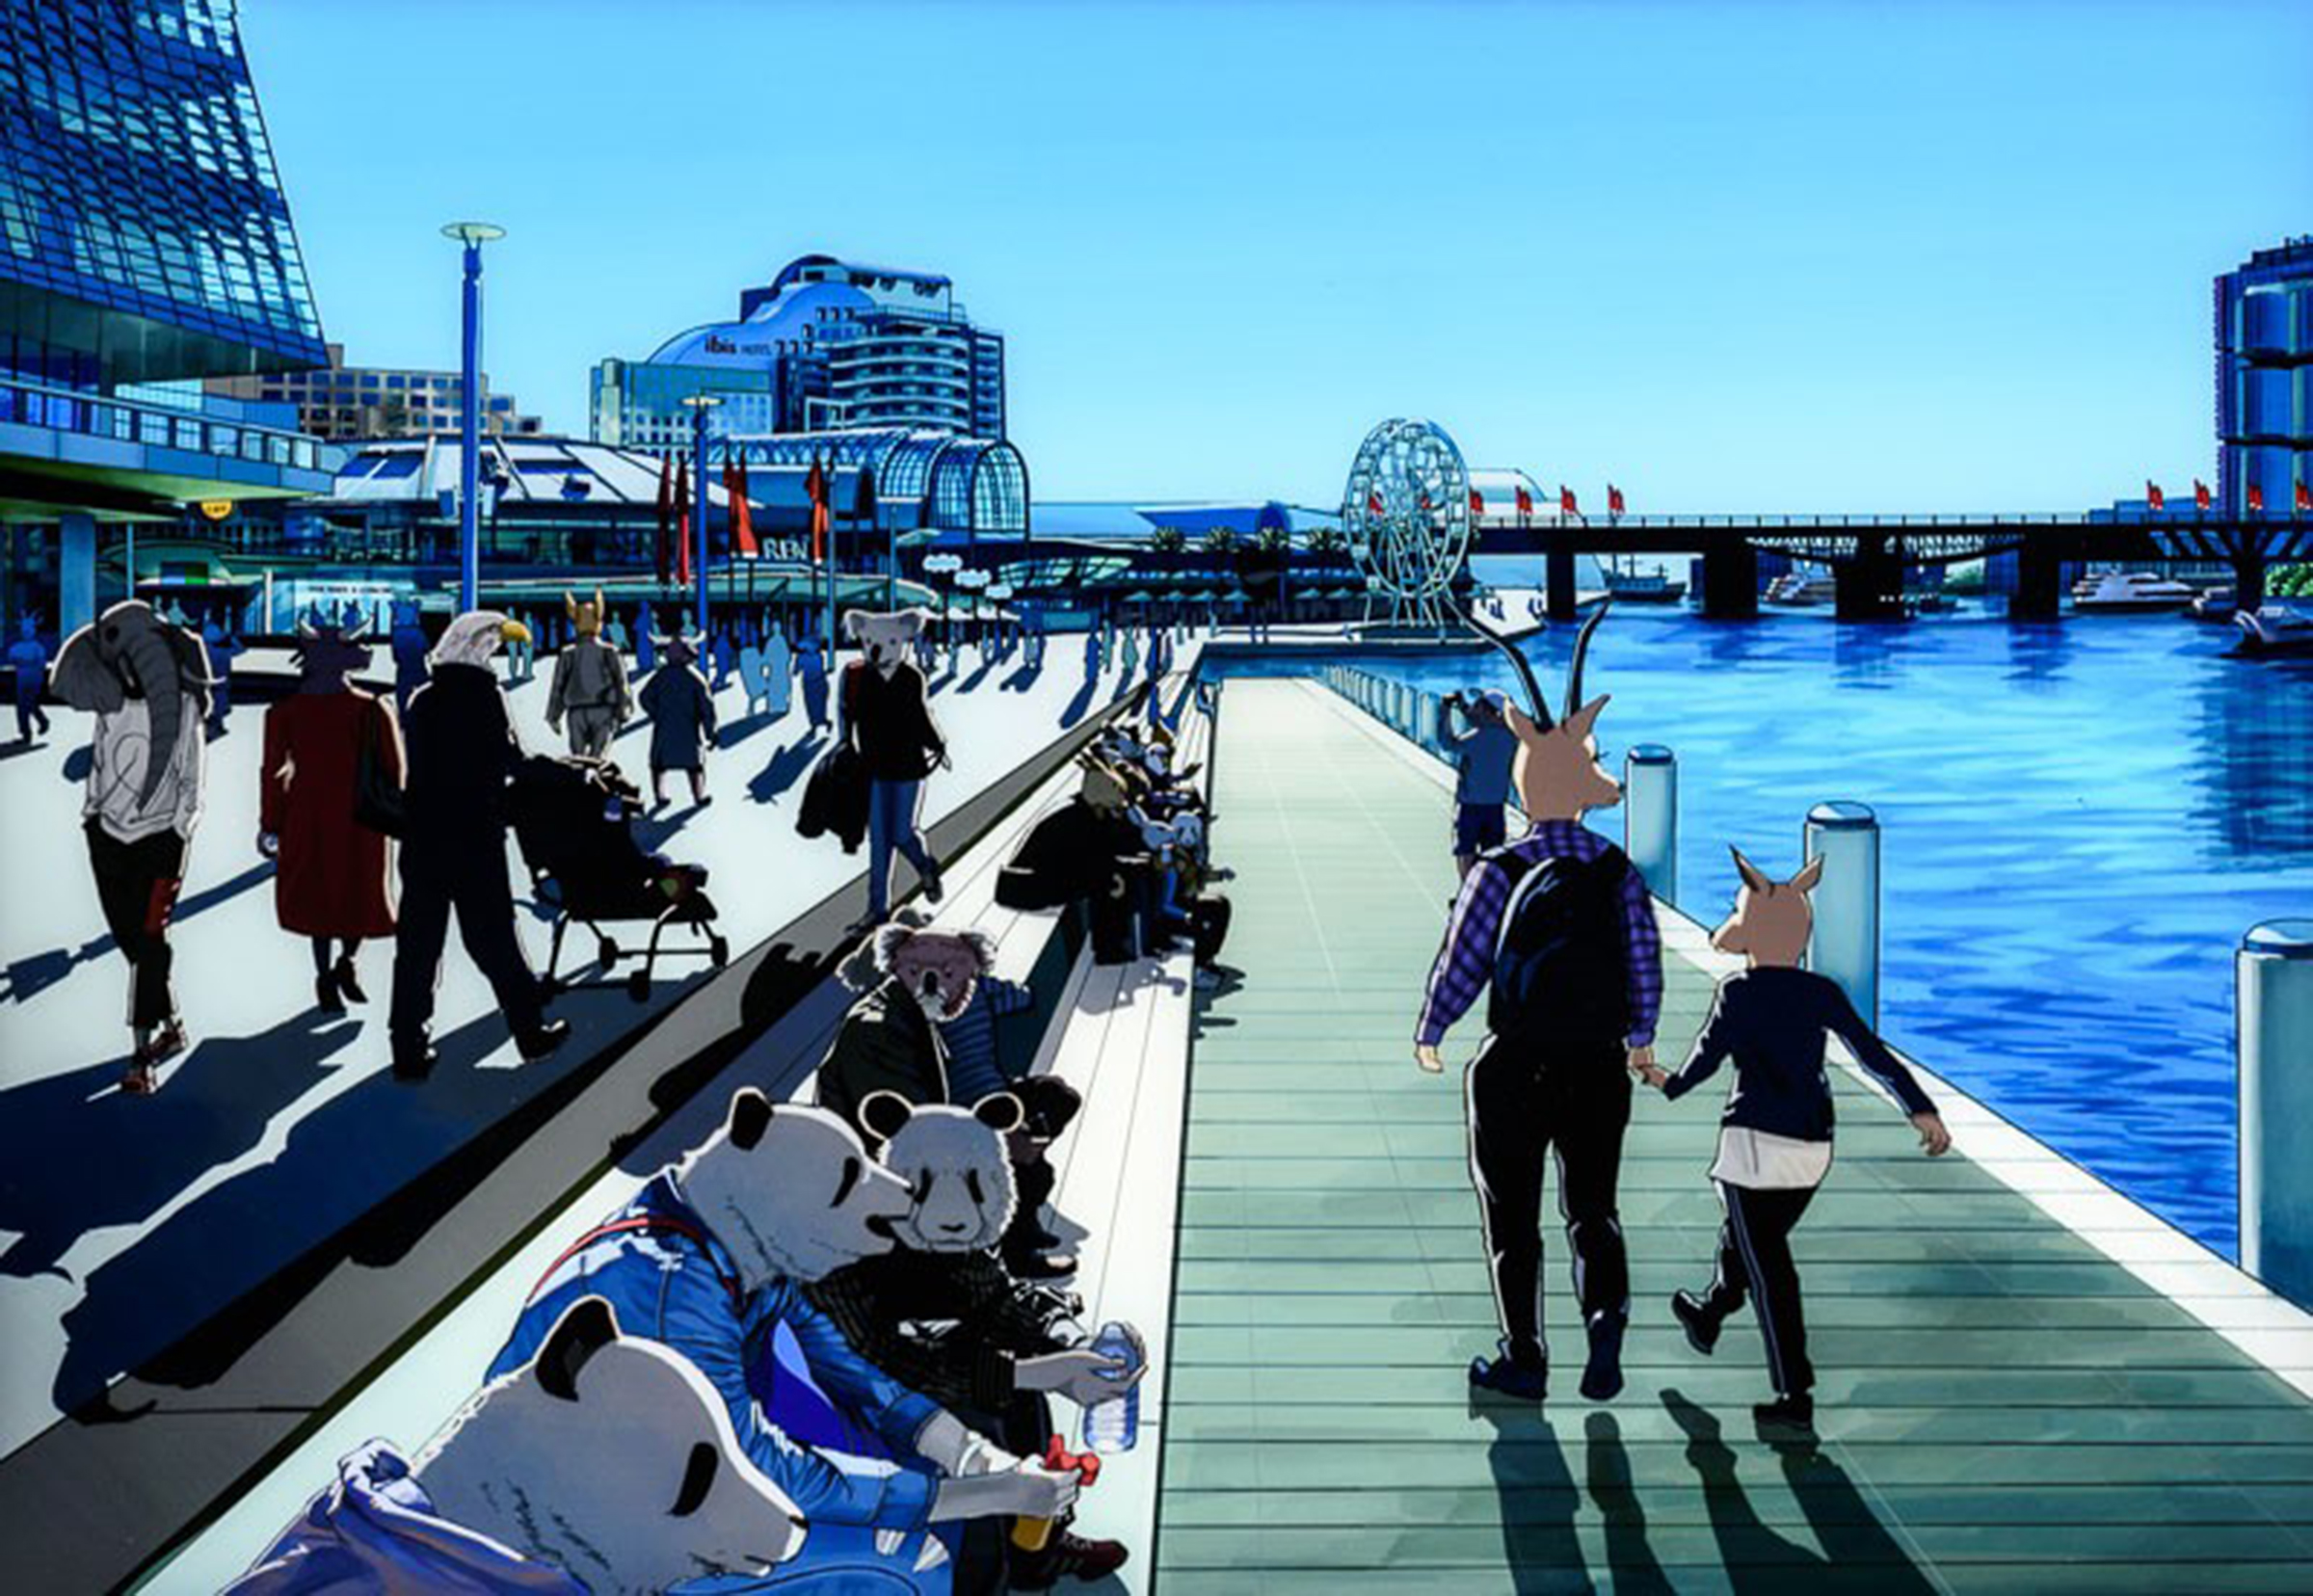 A cartoonn style illustration of animals as people at Sydney Harbour.